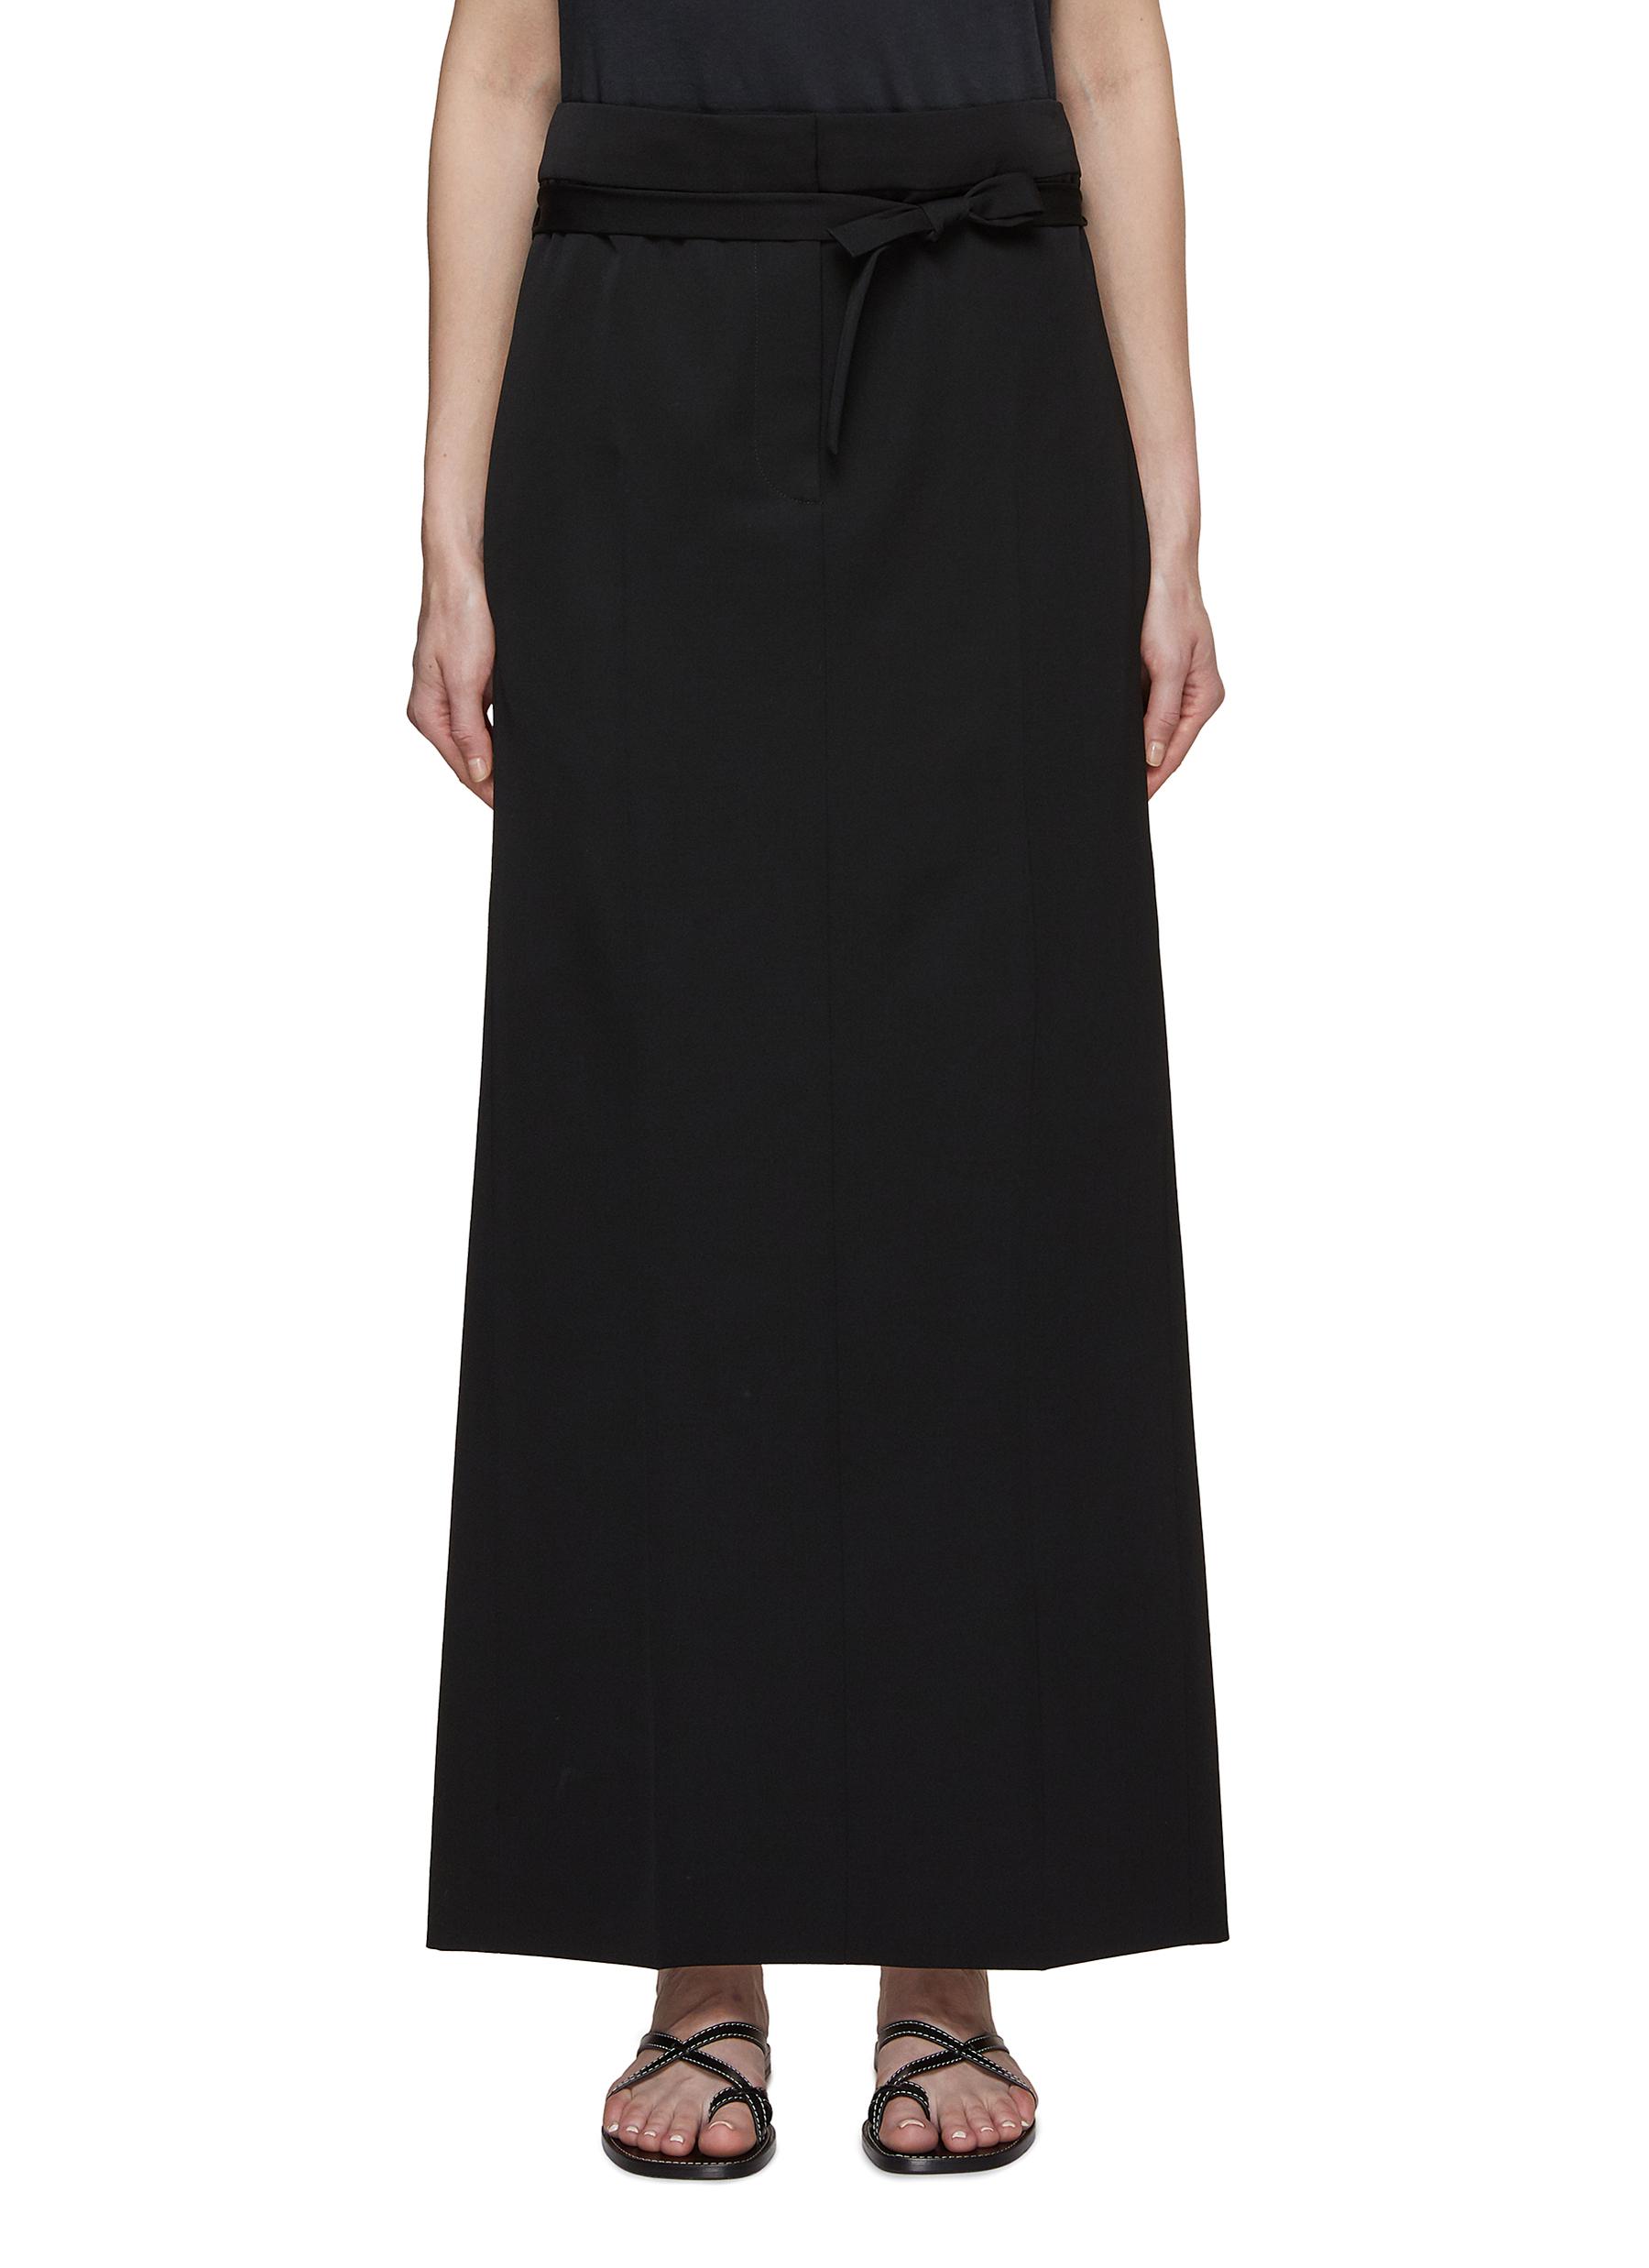 Trevy Belted Maxi Skirt